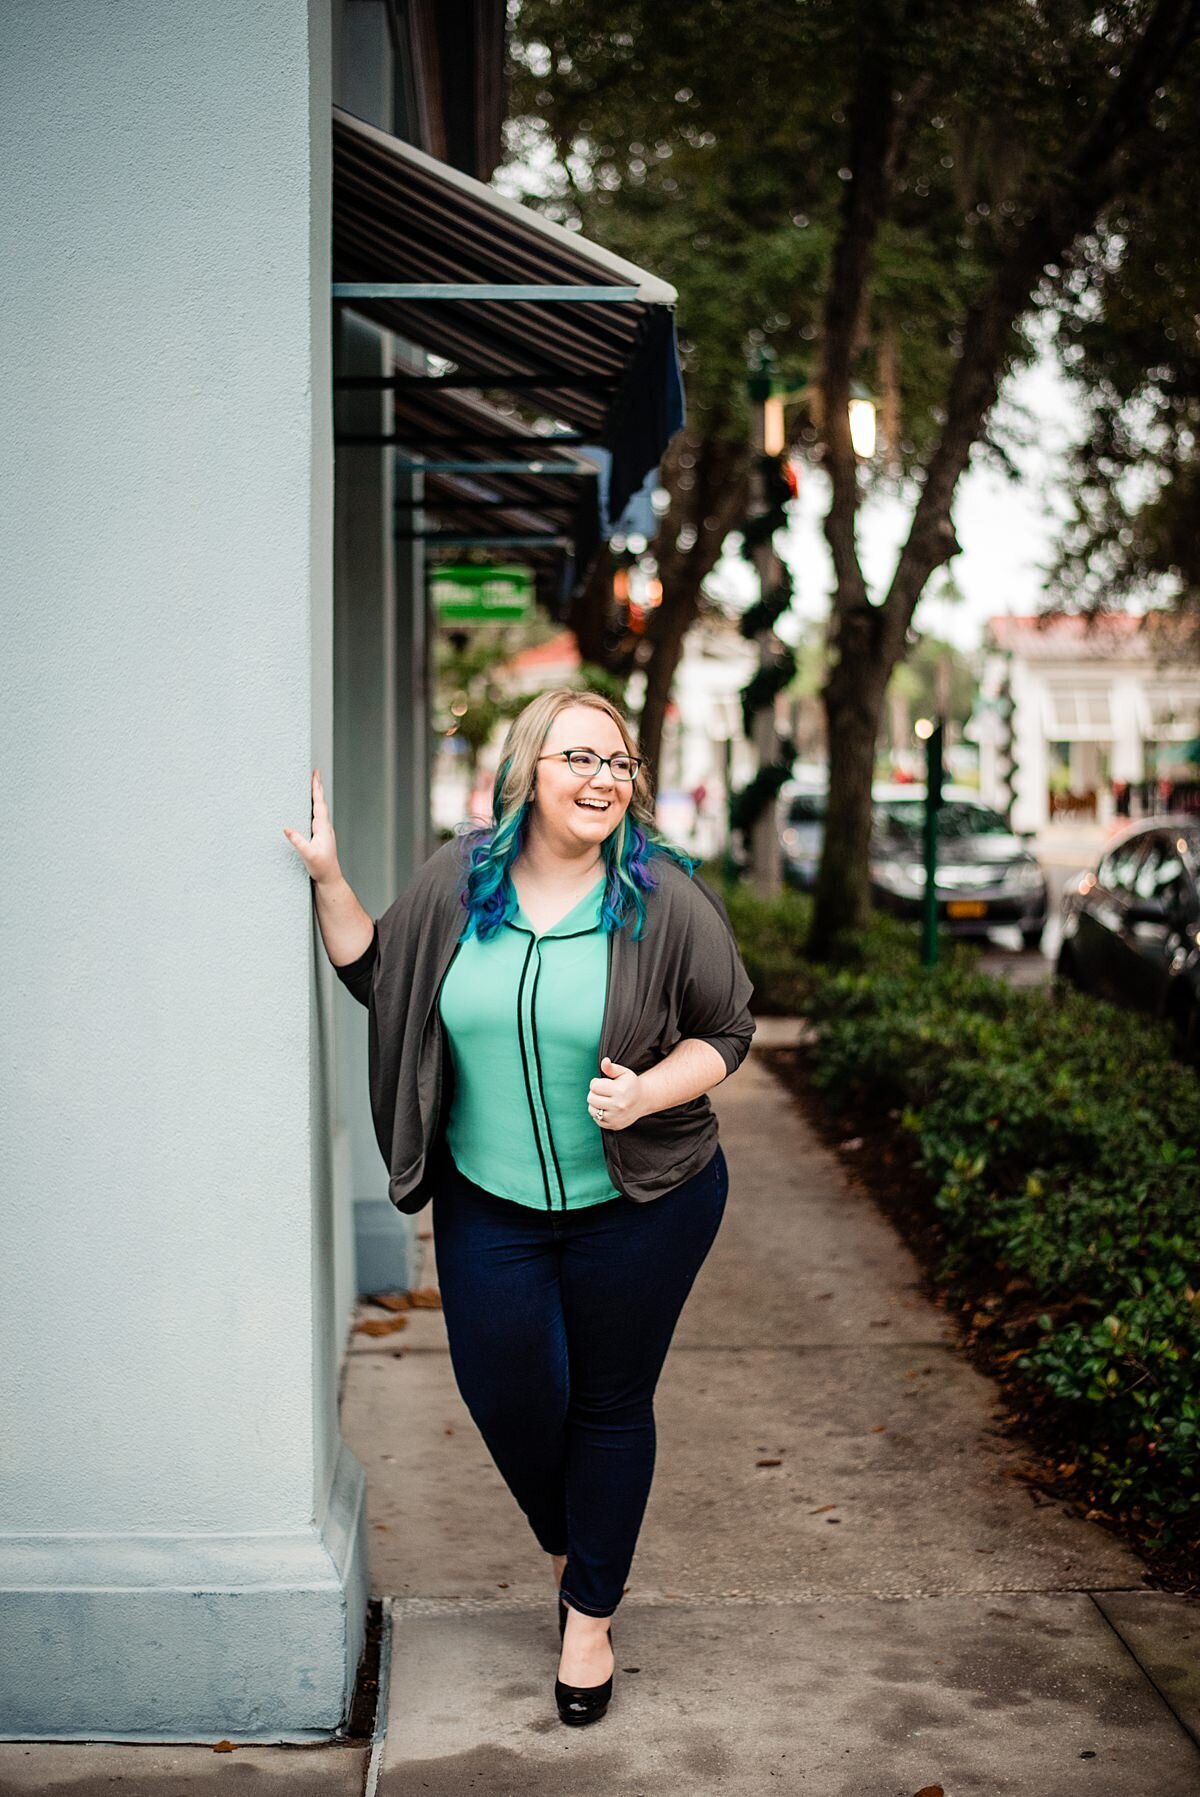 Mahlia wearing mint with teal curled hair in charming downtown Orlando village